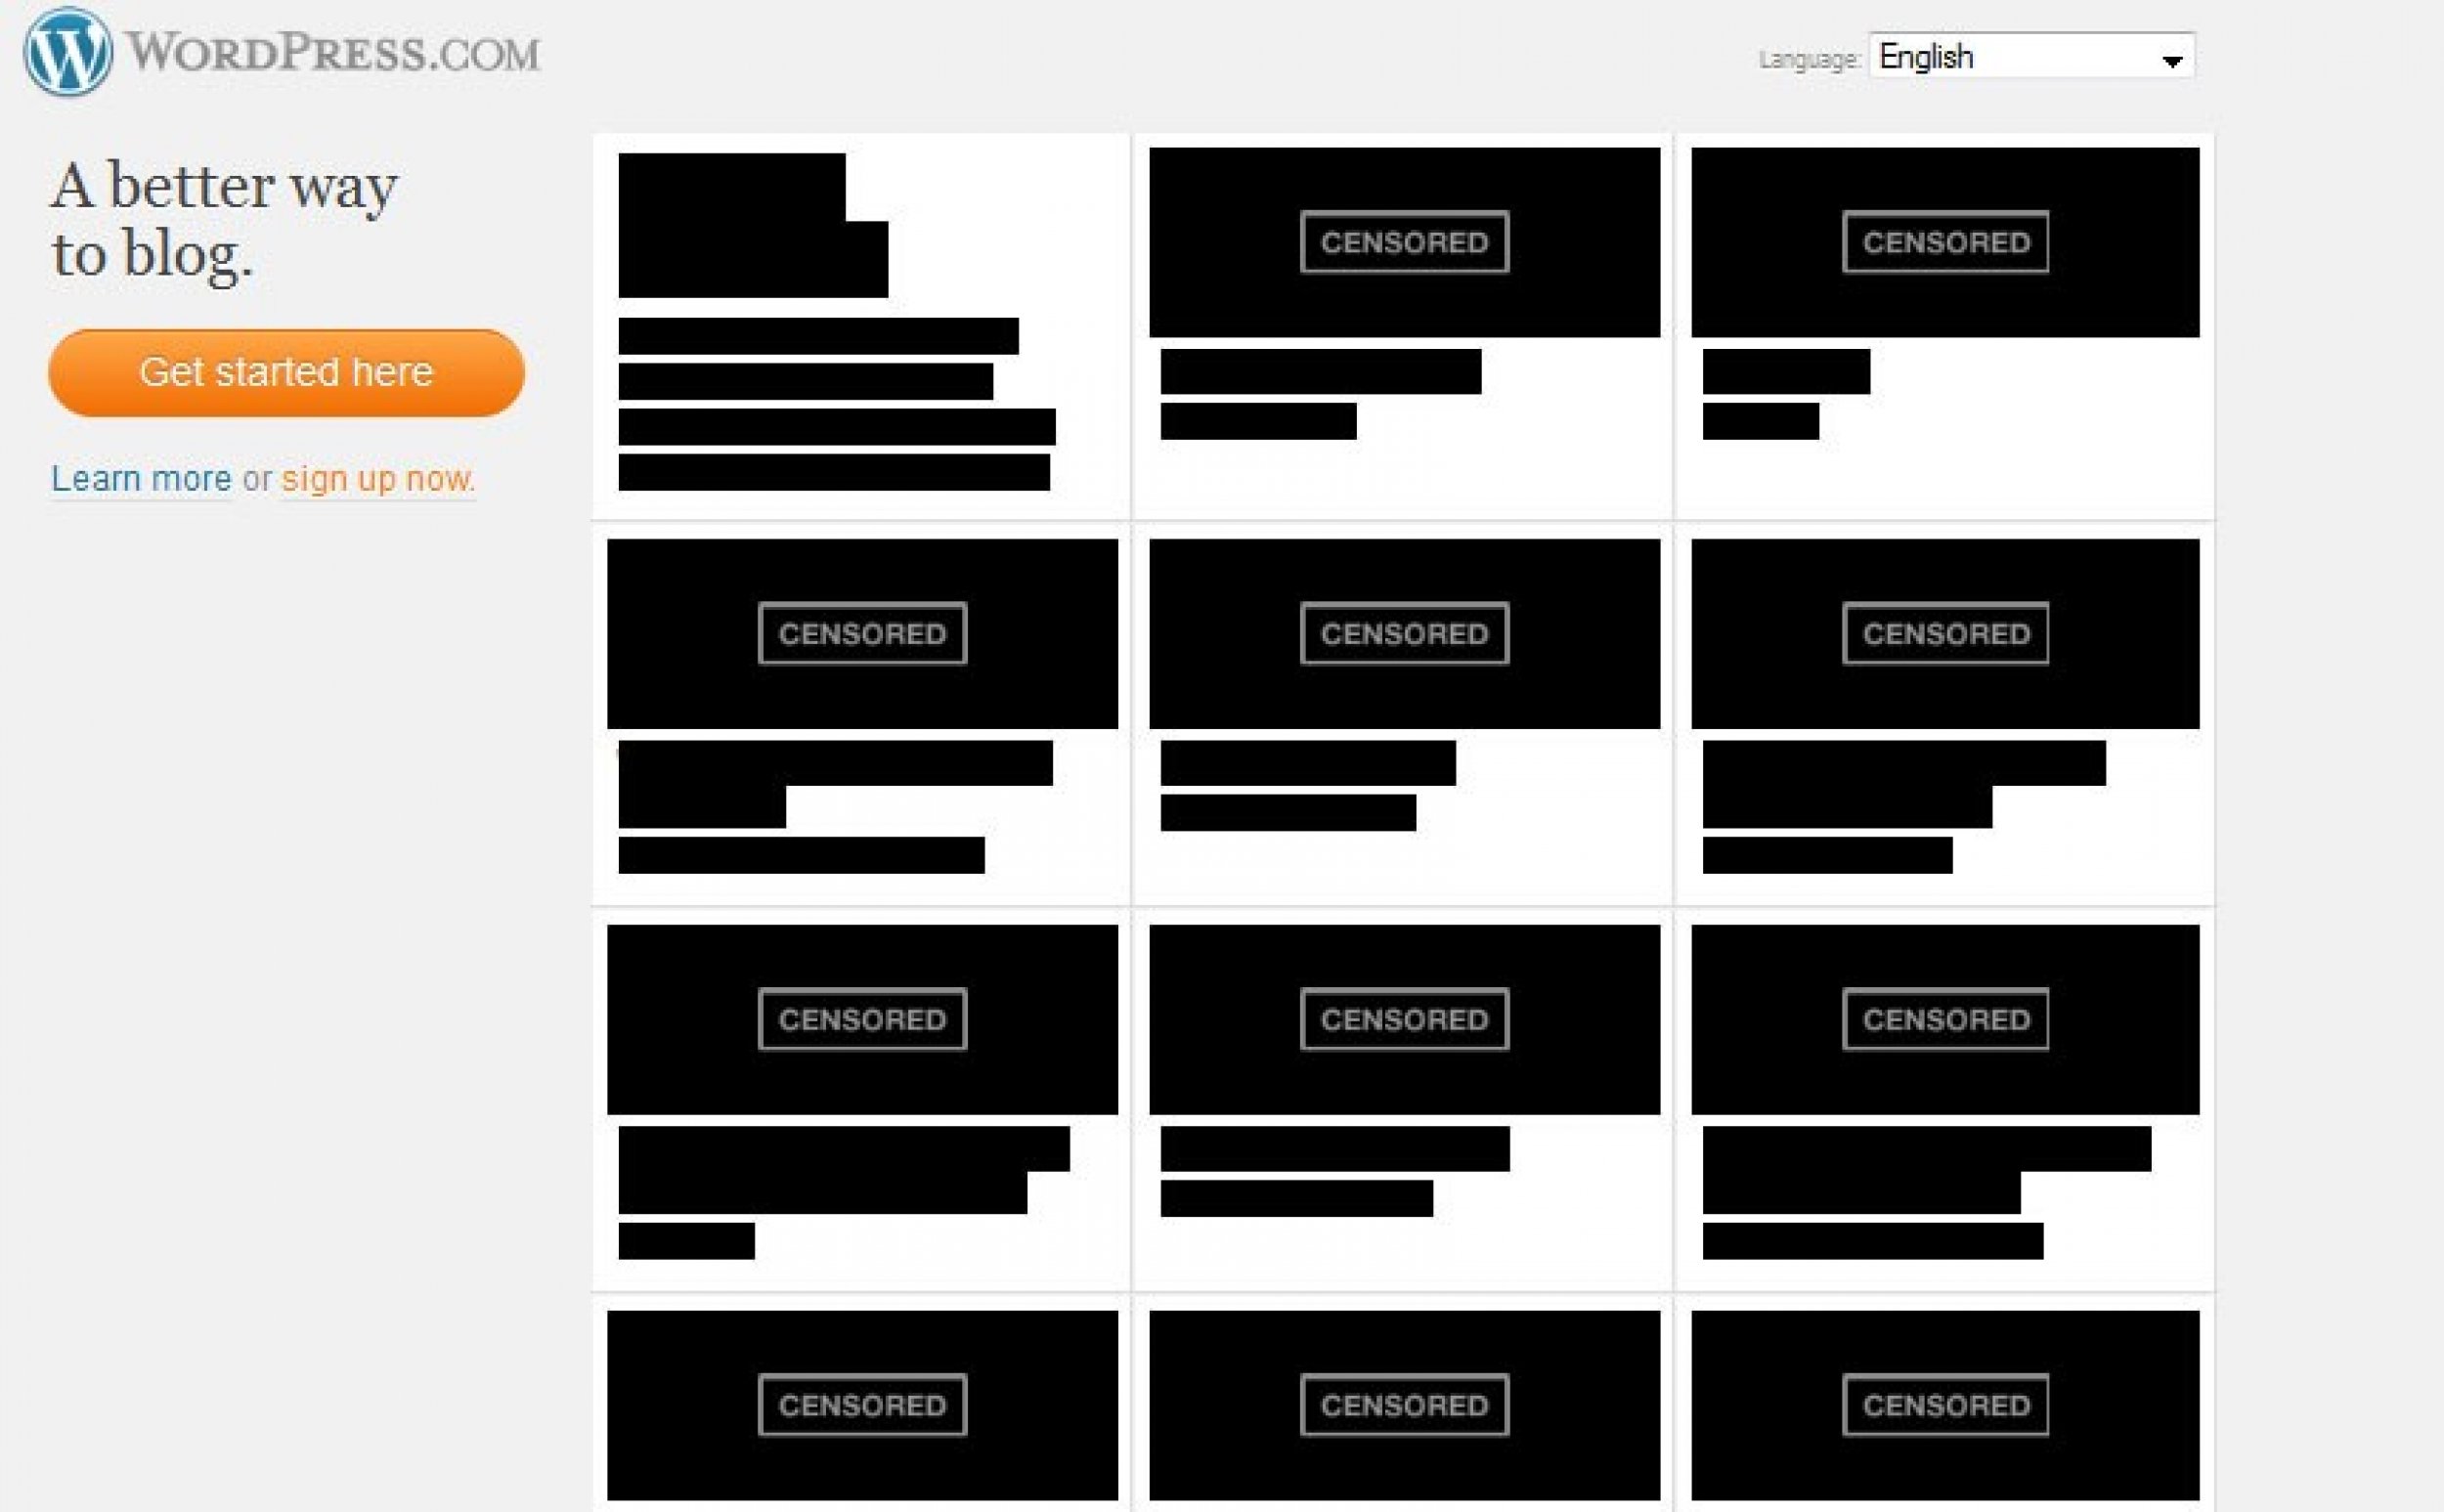 WordPress Blackout in protest against SOPA